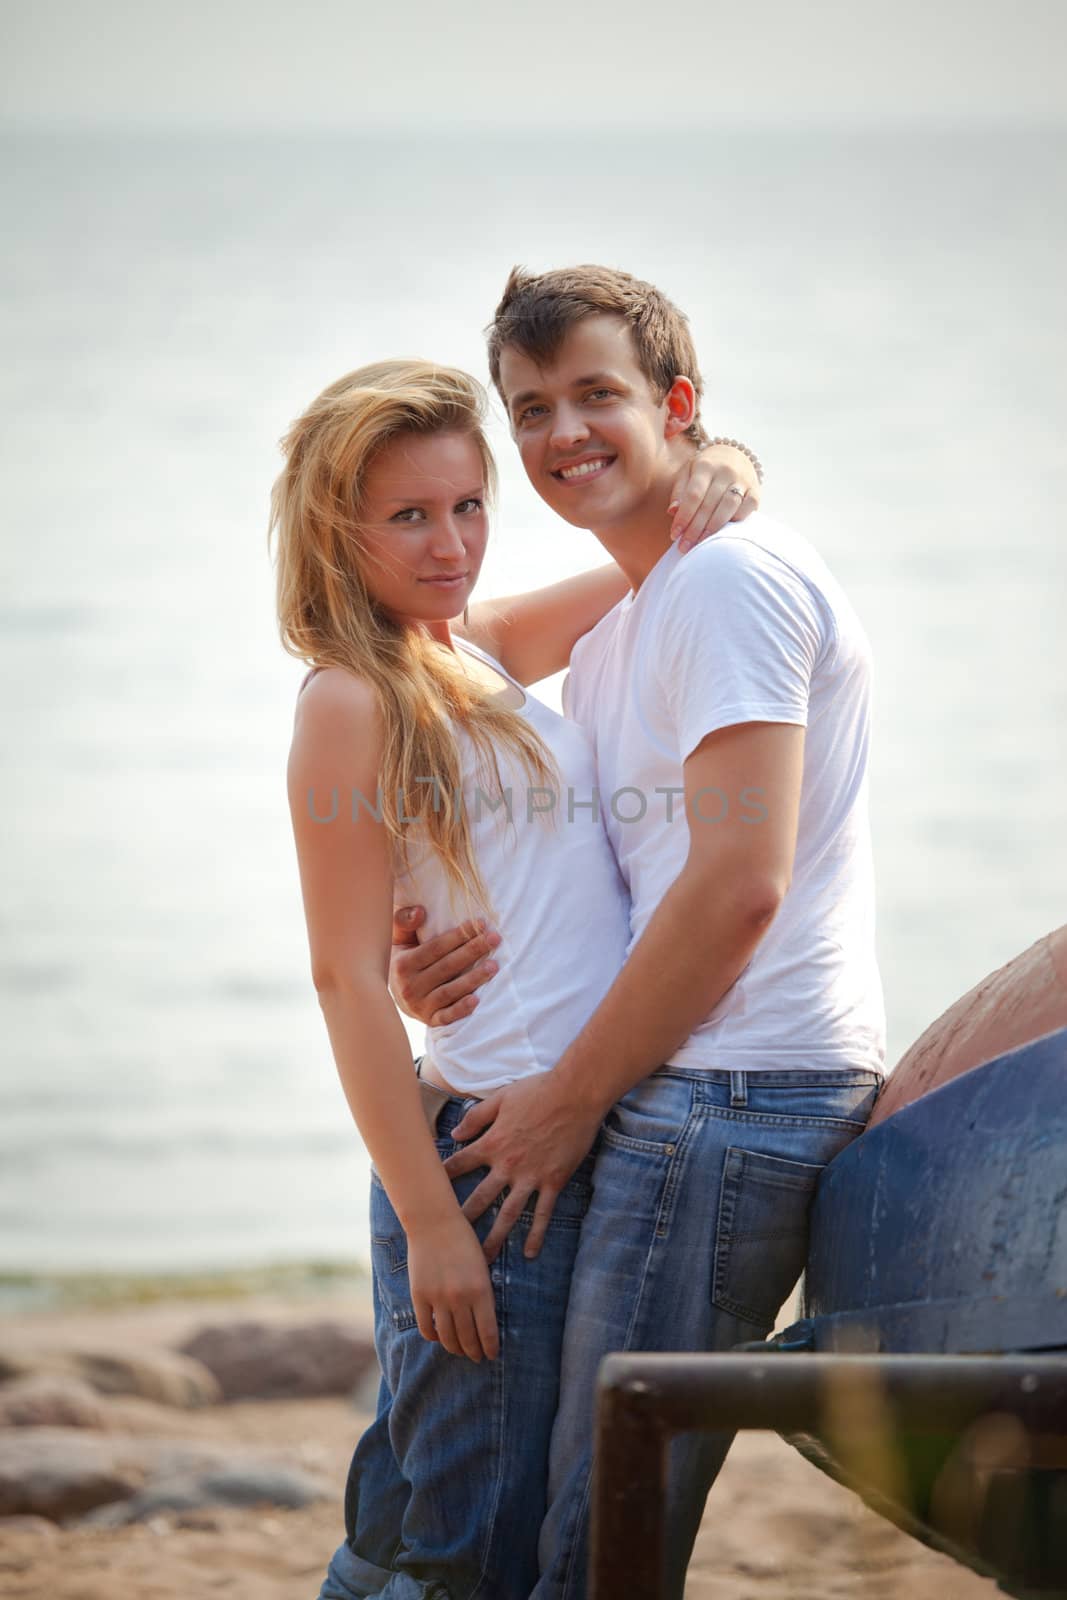 couple on a beach by petr_malyshev